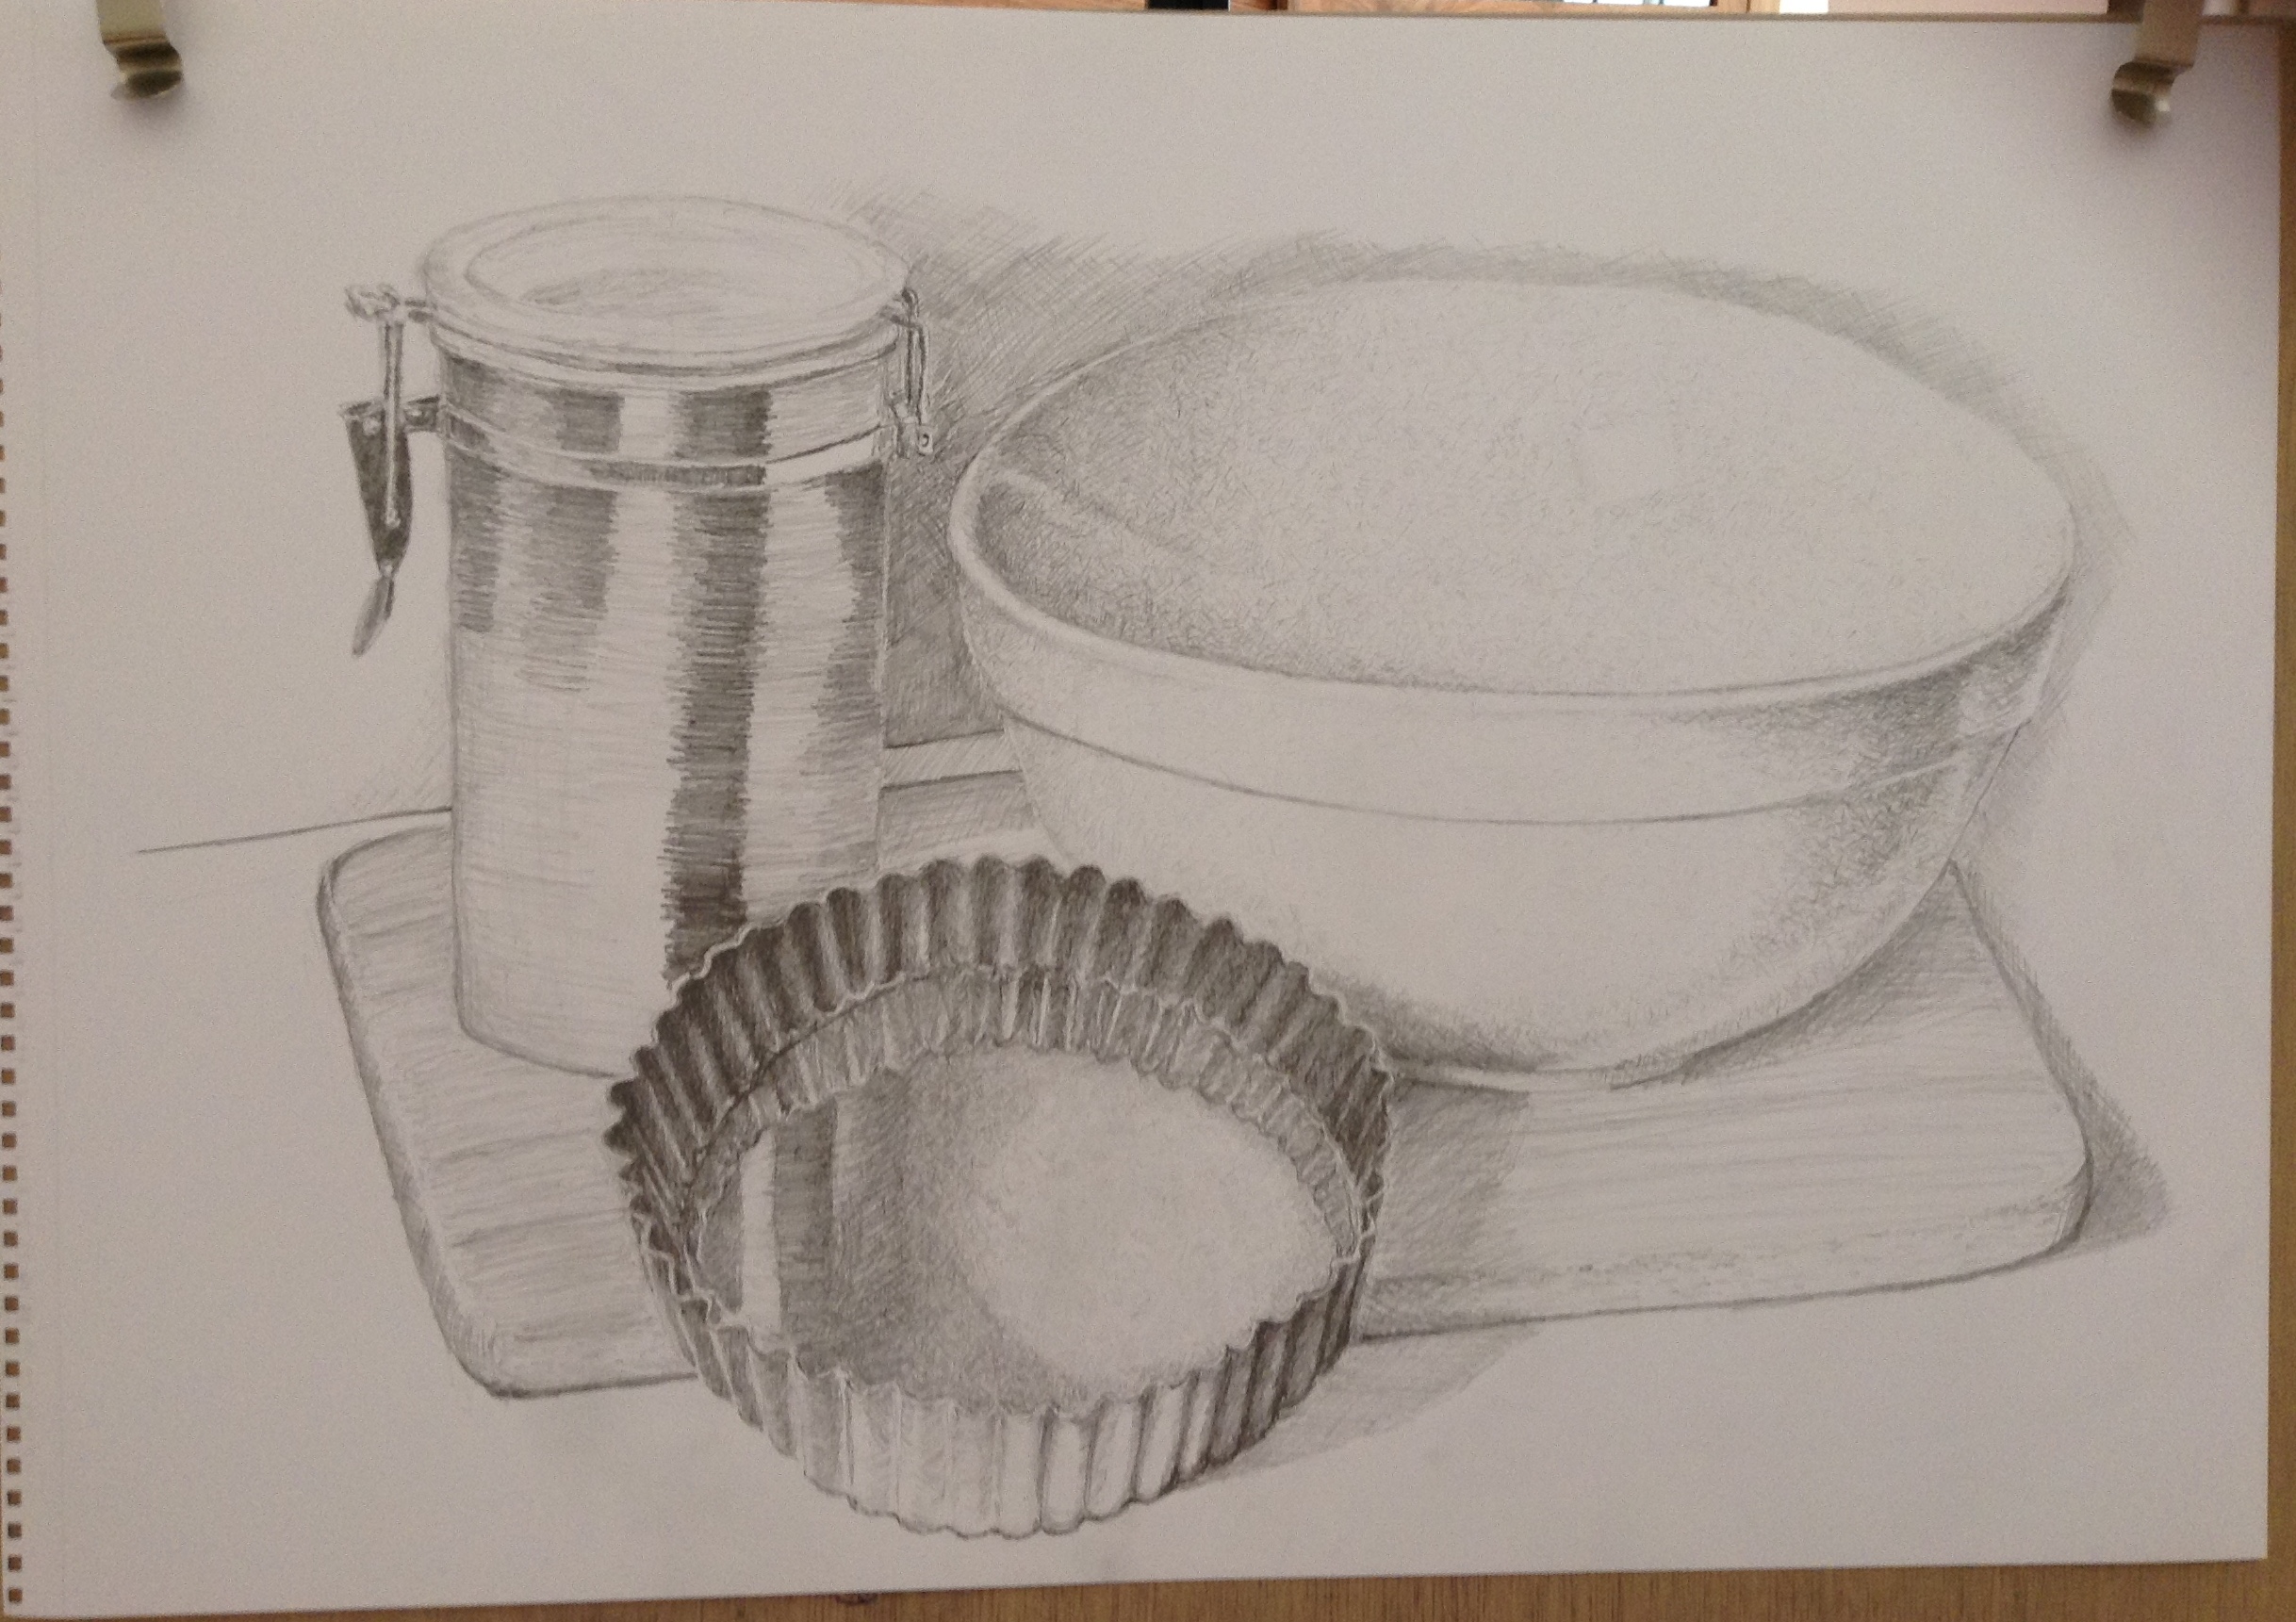 Part 2 Project 1 Exercise 1: Compositional sketches of man made objects –  Drawing 1:Drawing Skills